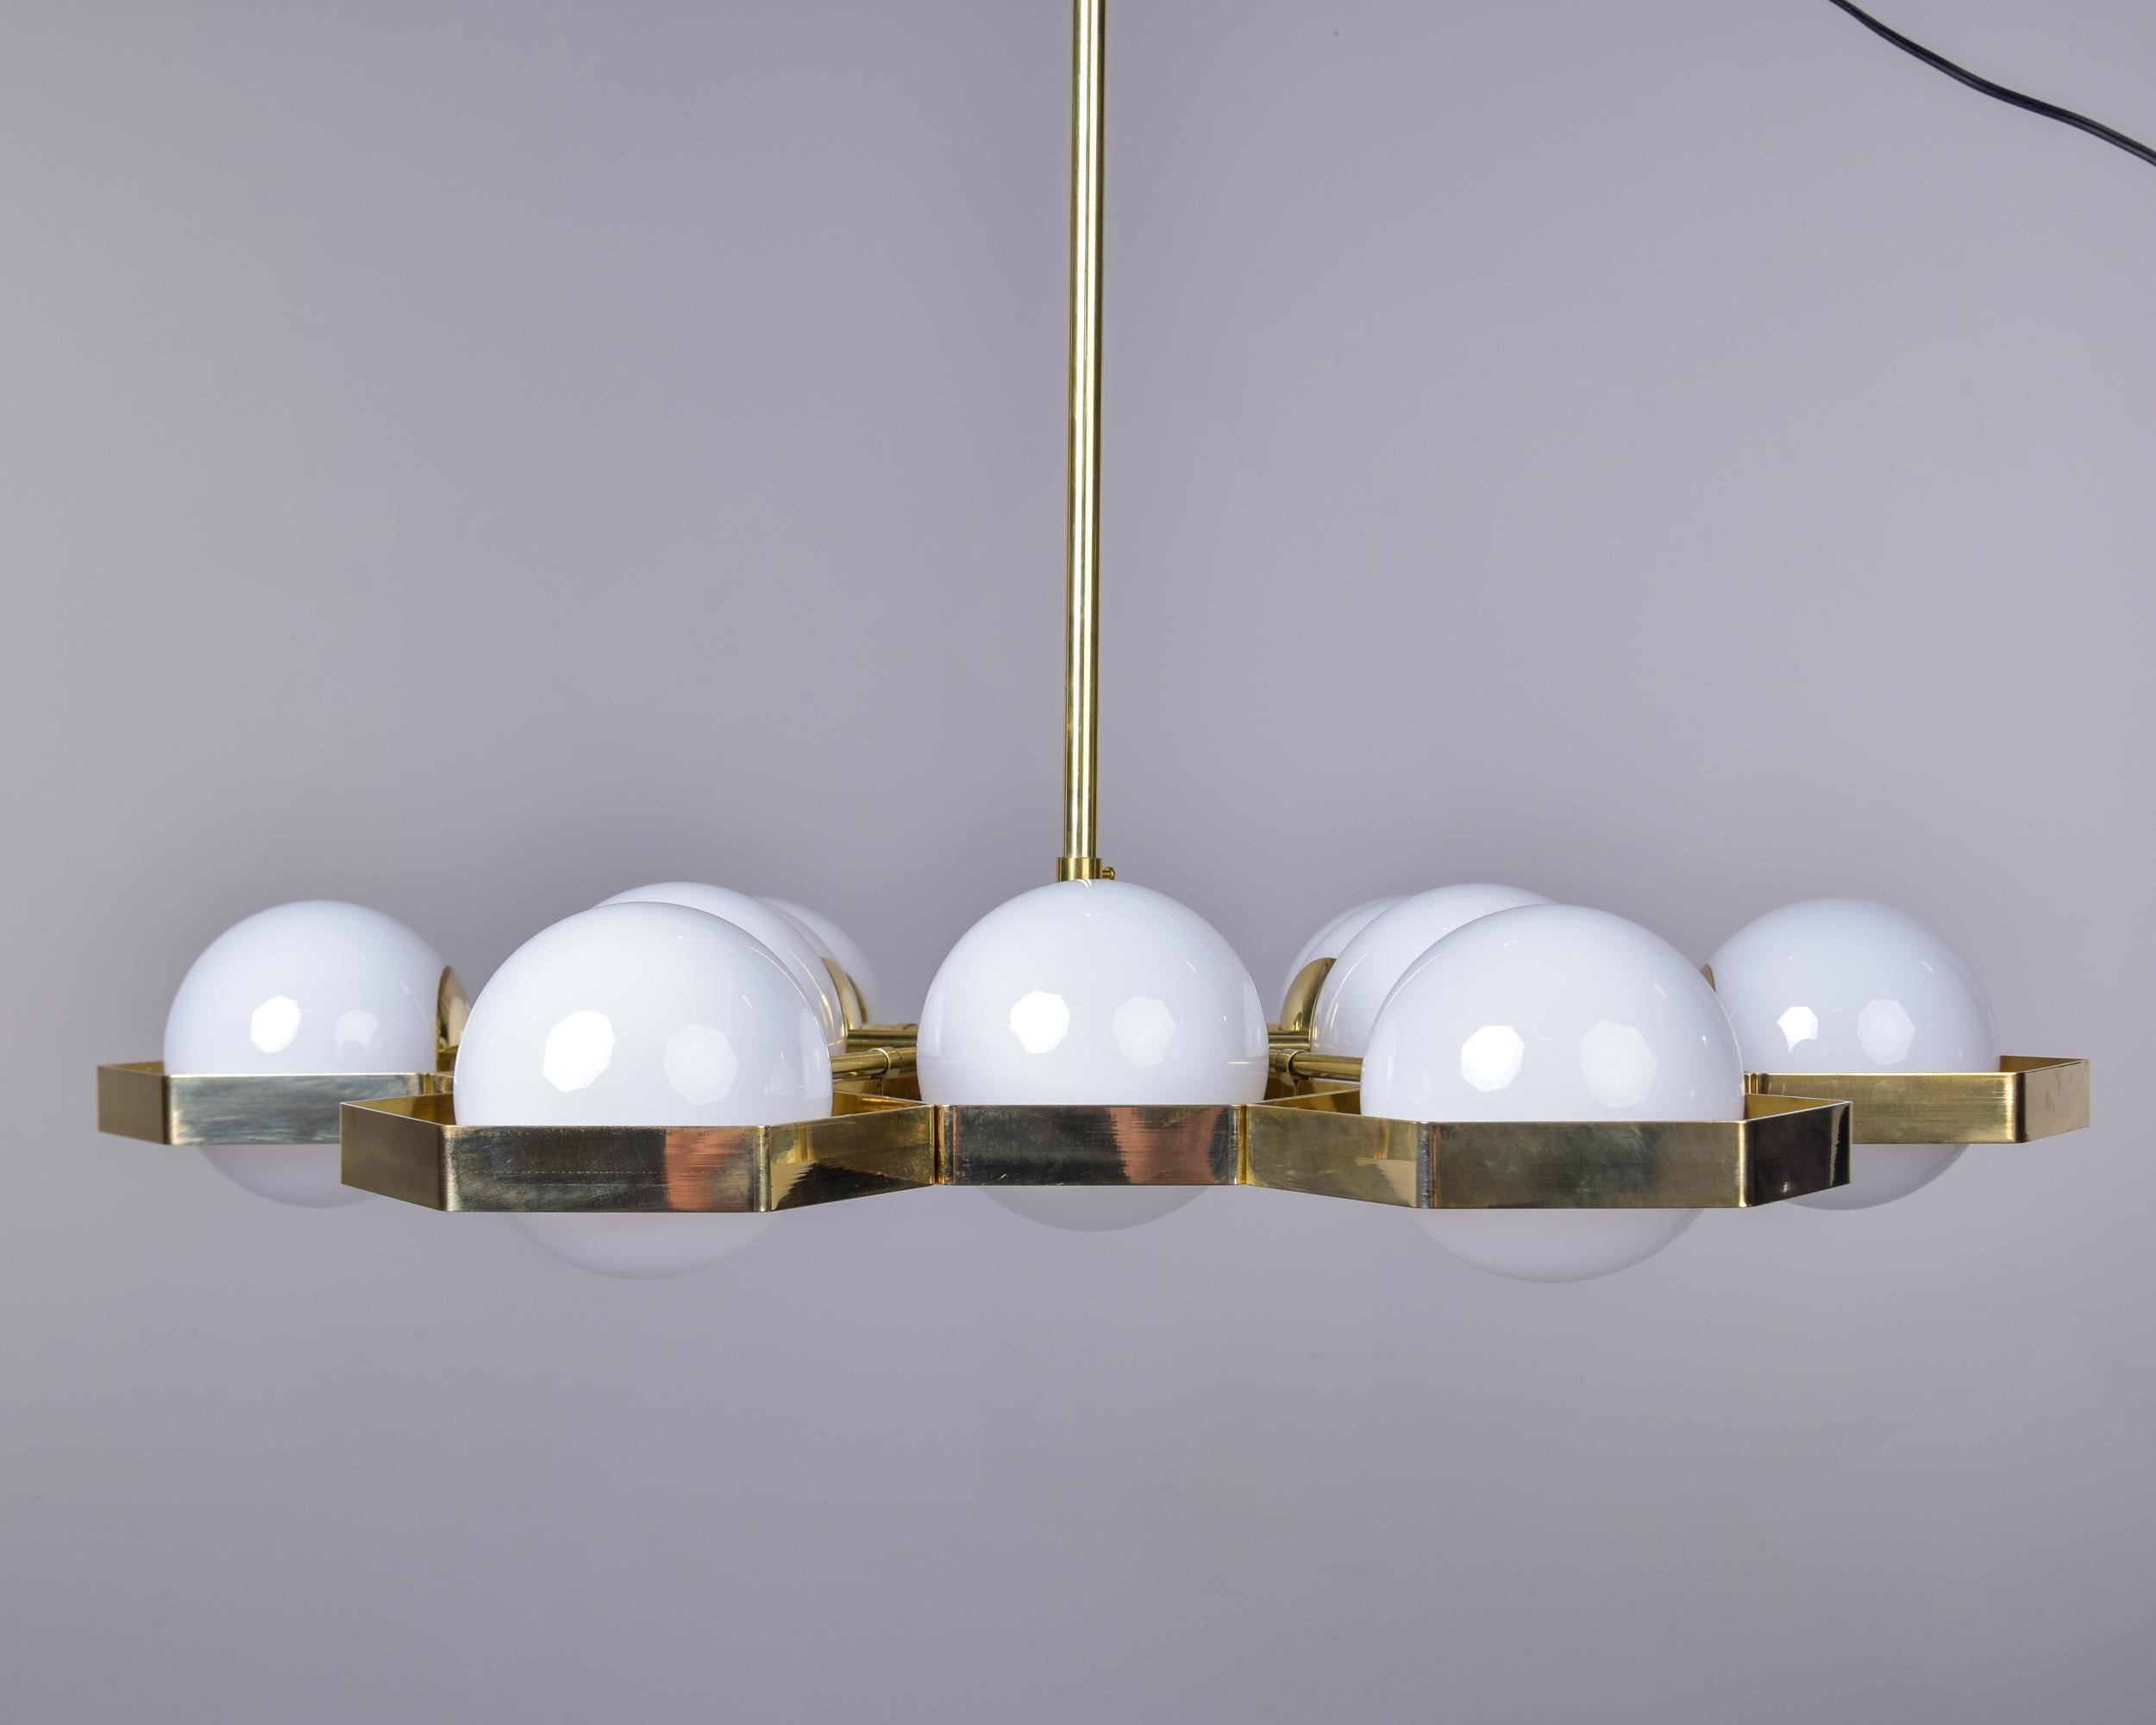 New 12 Light Italian Fixture with Honeycomb Brass Frame and White Globes  8